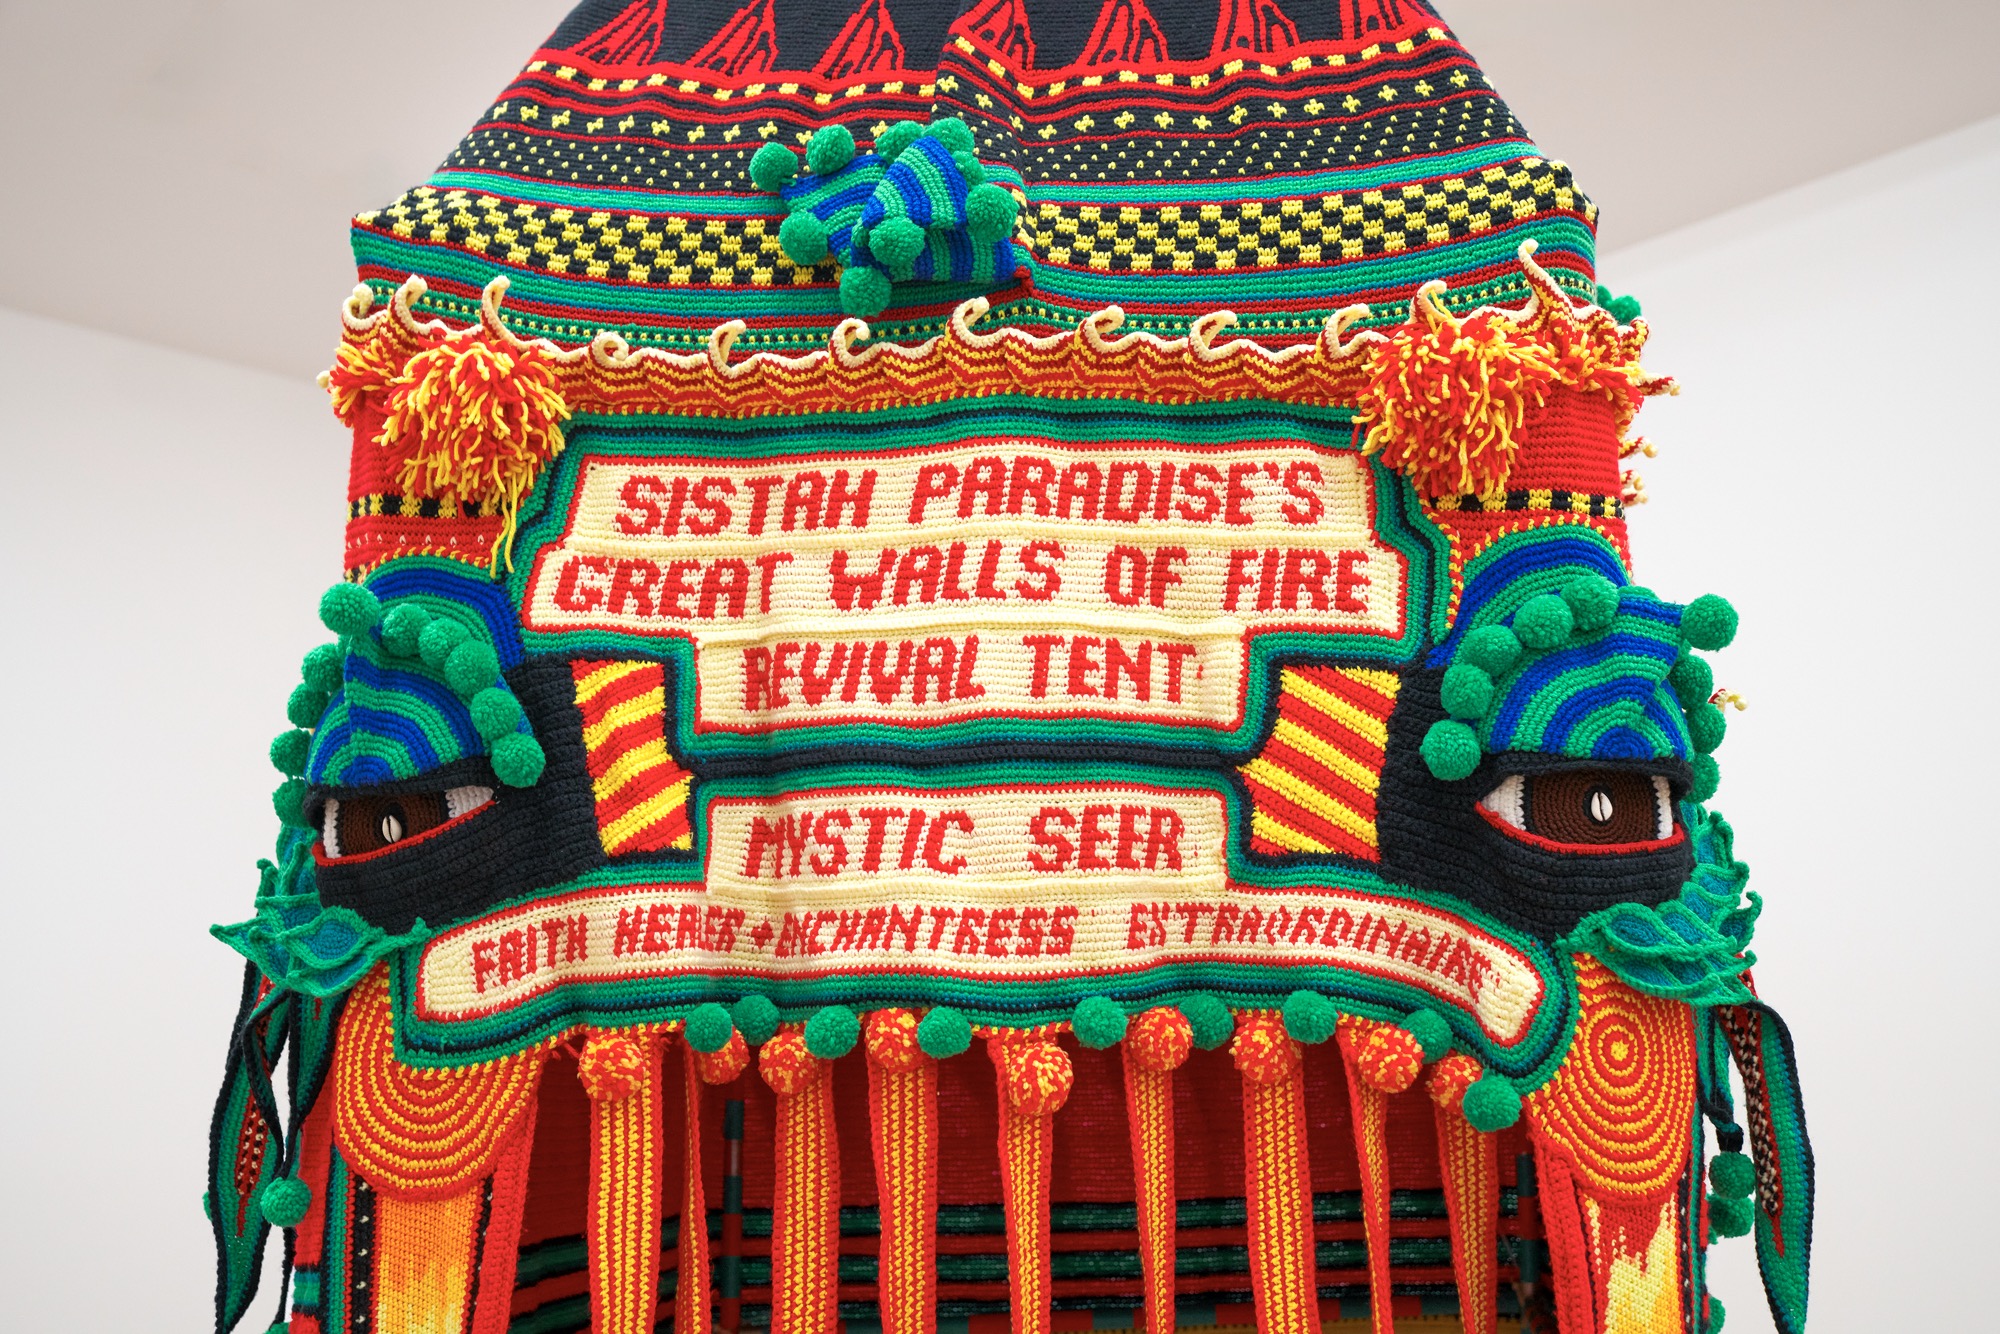 detail of a crocheted artwork shaped like a tent with the phrase "sistah paradise's great walls of fire revival tent—mystic seer"